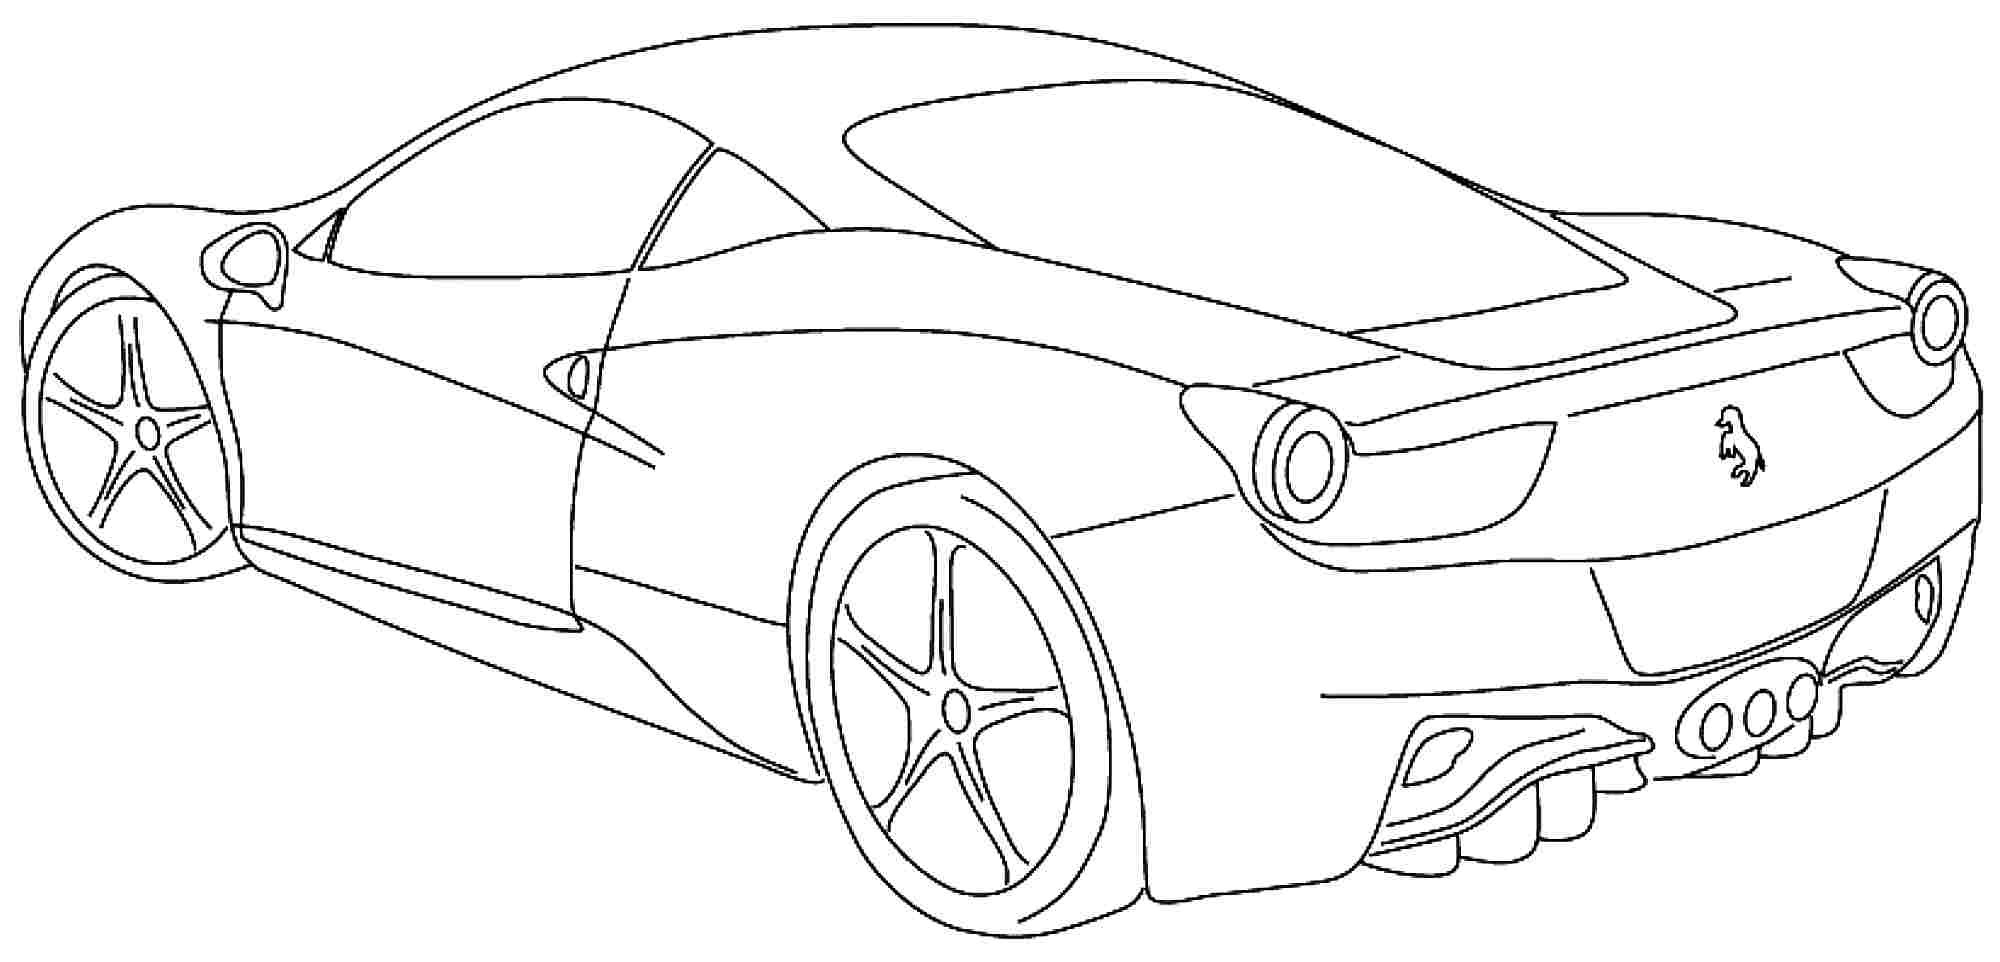 Coloring Pages For Boys Car
 Sports Cars Coloring Pages For Boys – Color Bros